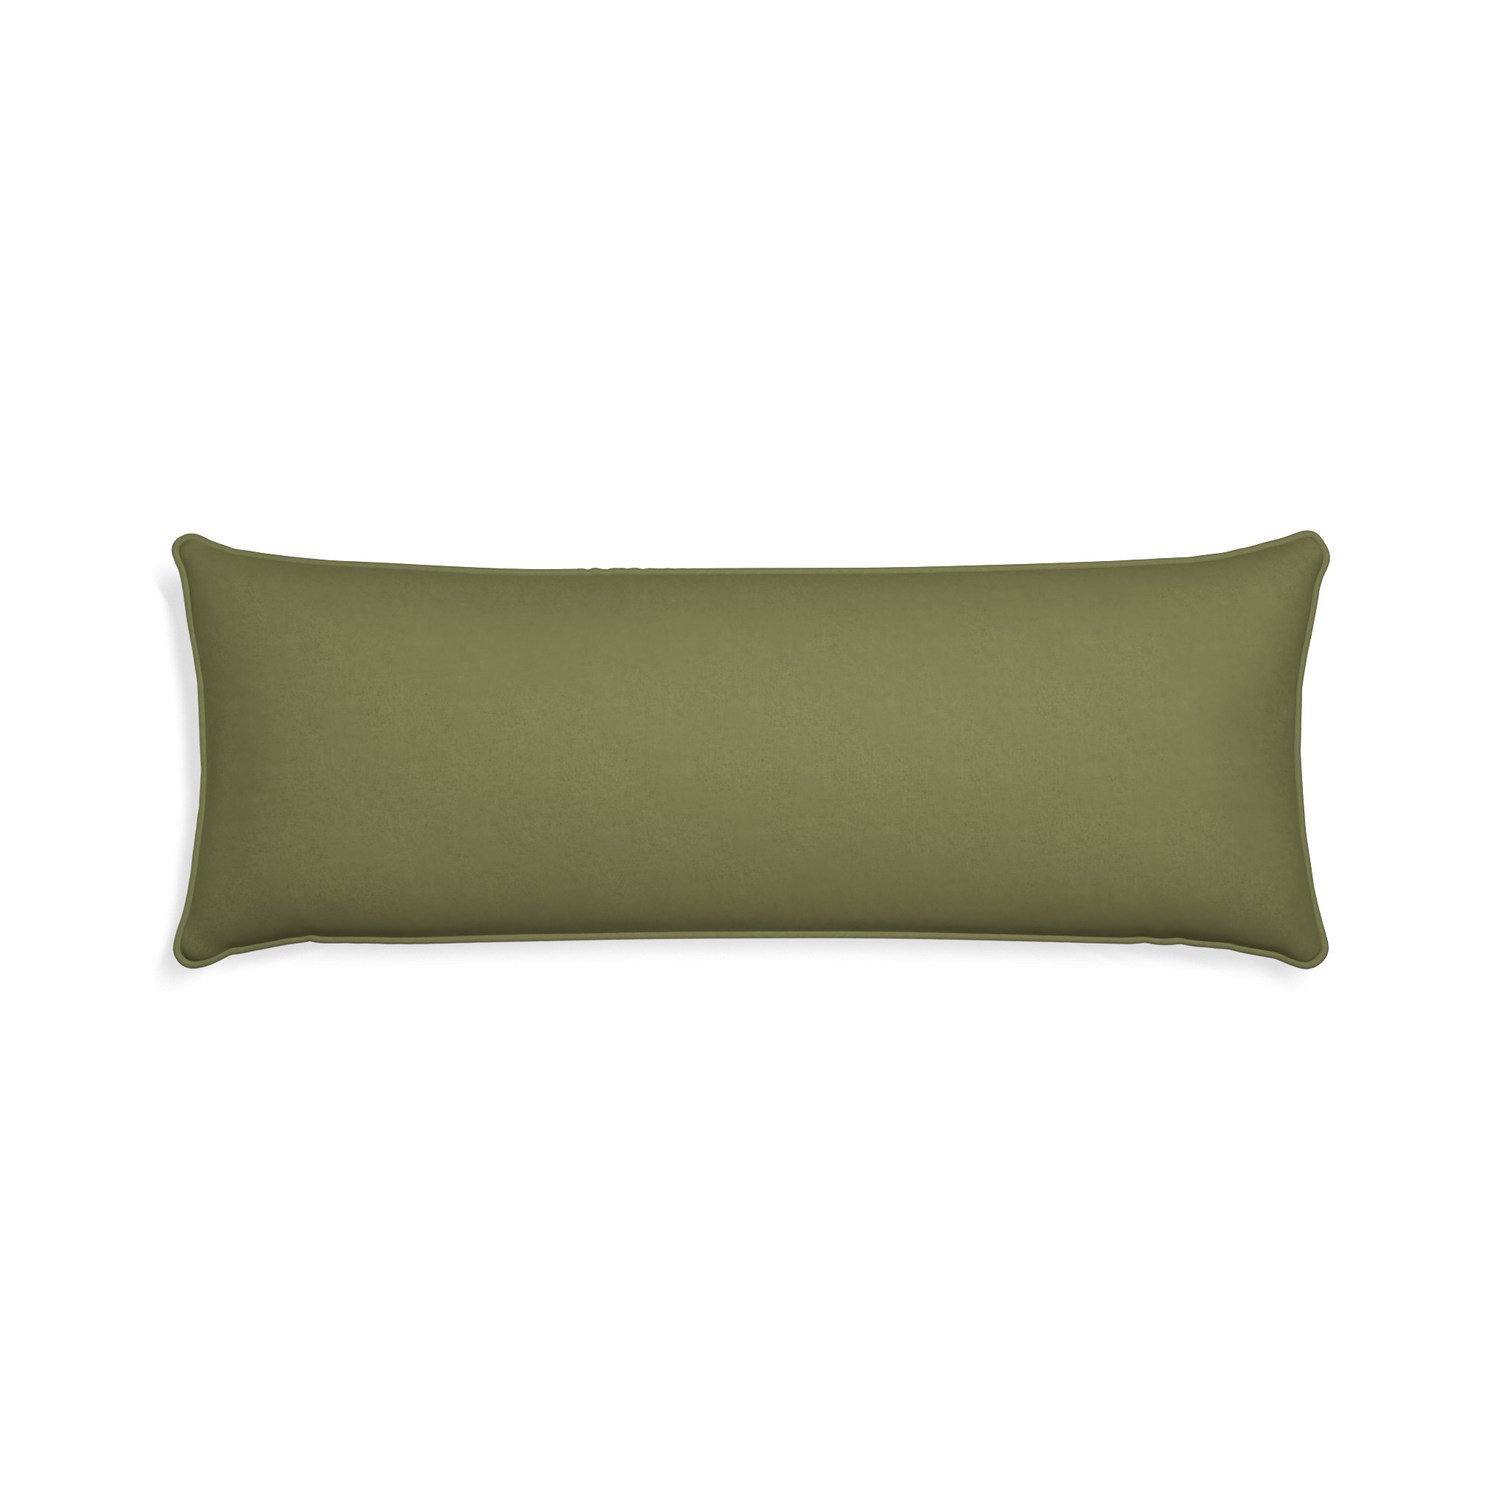 rectangle moss green pillow with moss green piping